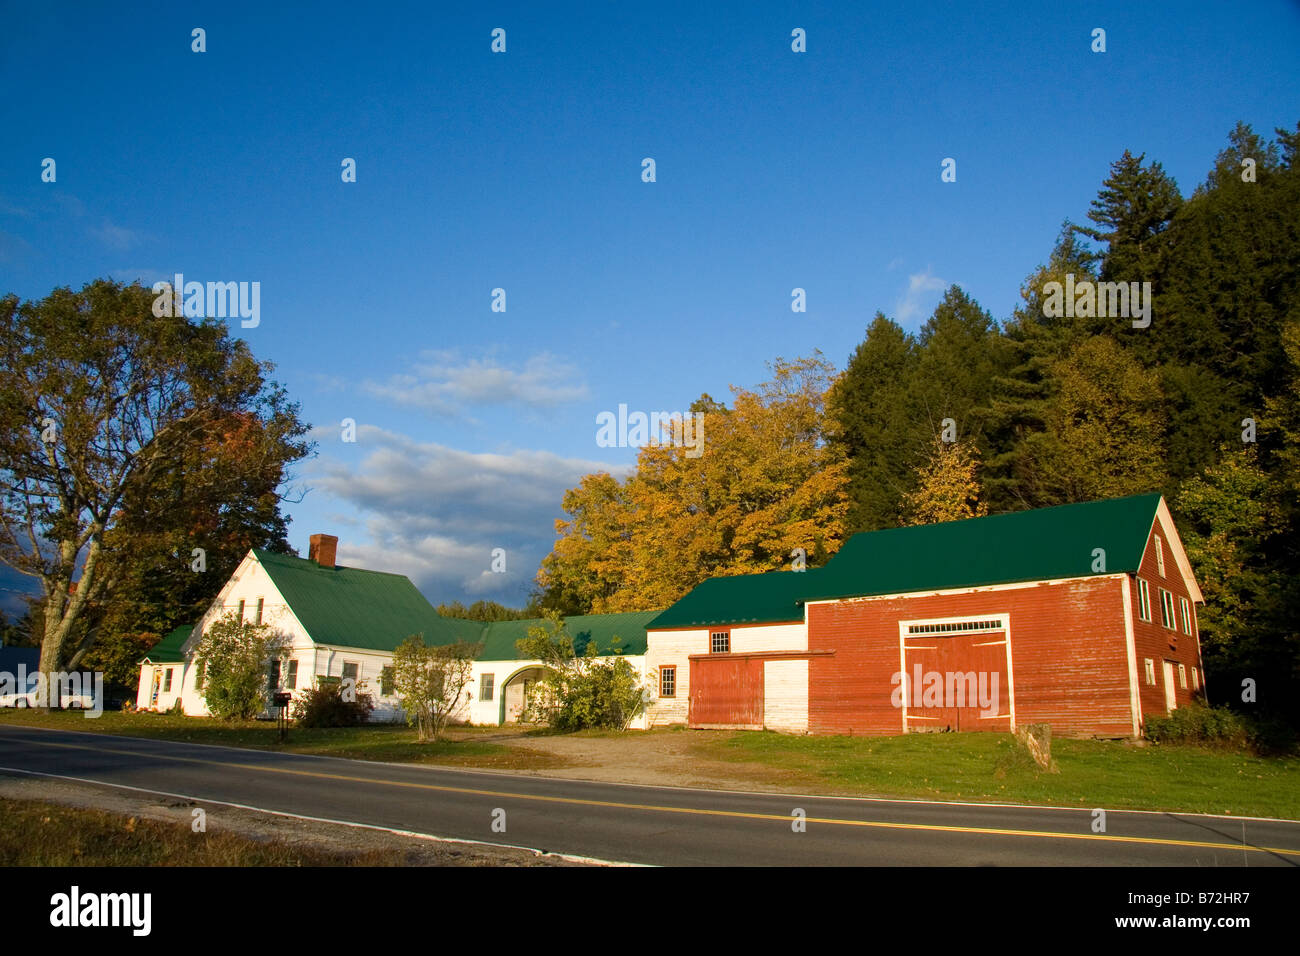 Red barn and residential home in the town of Wentworth New Hampshire USA Stock Photo